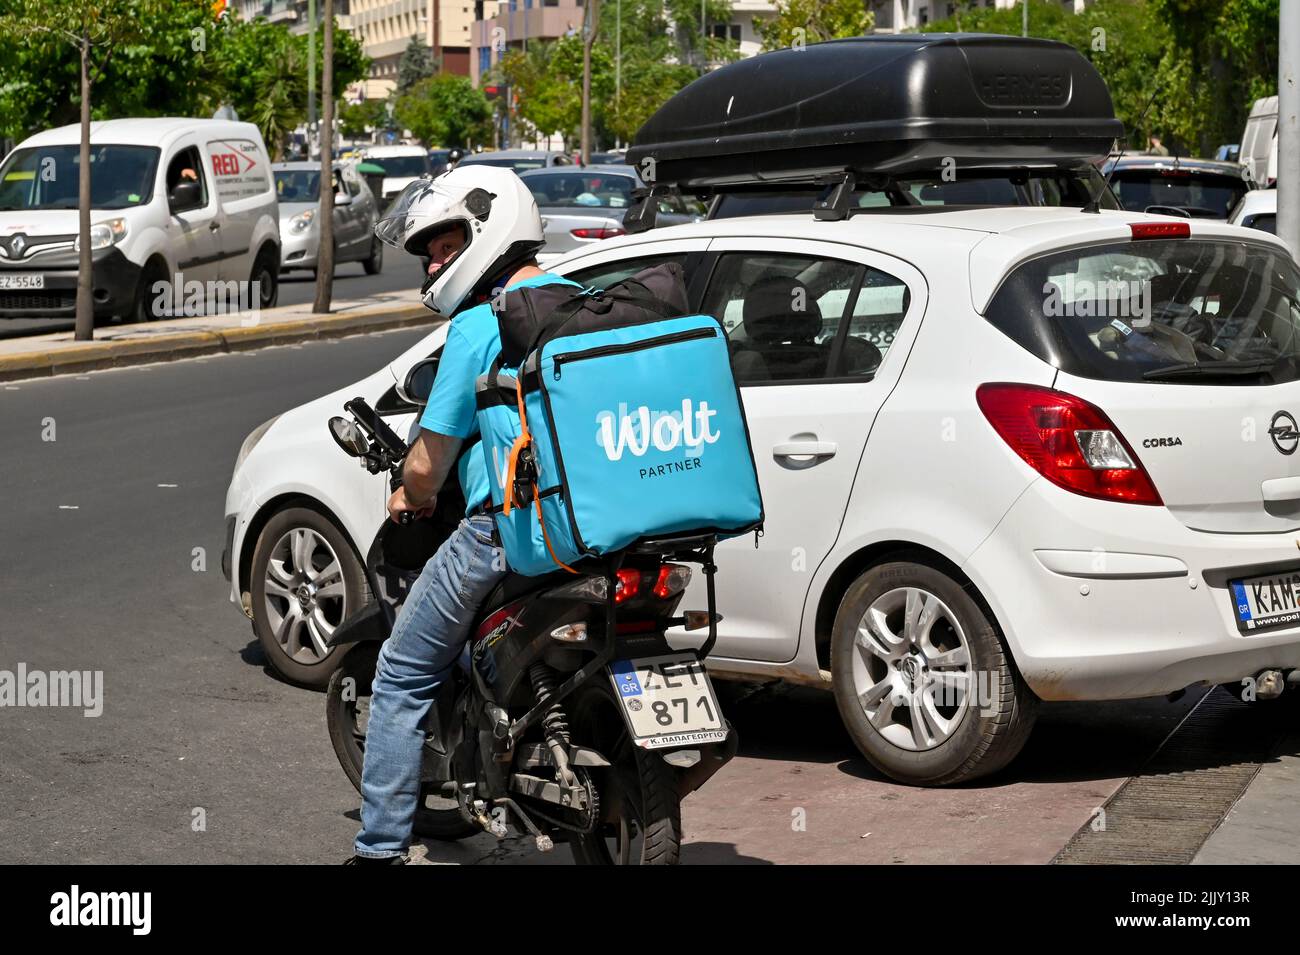 Athens, Greece - May 2022: Container on the back of a motor scooter for delivering take away food. The box is branded with the Wolt partner delivery c Stock Photo